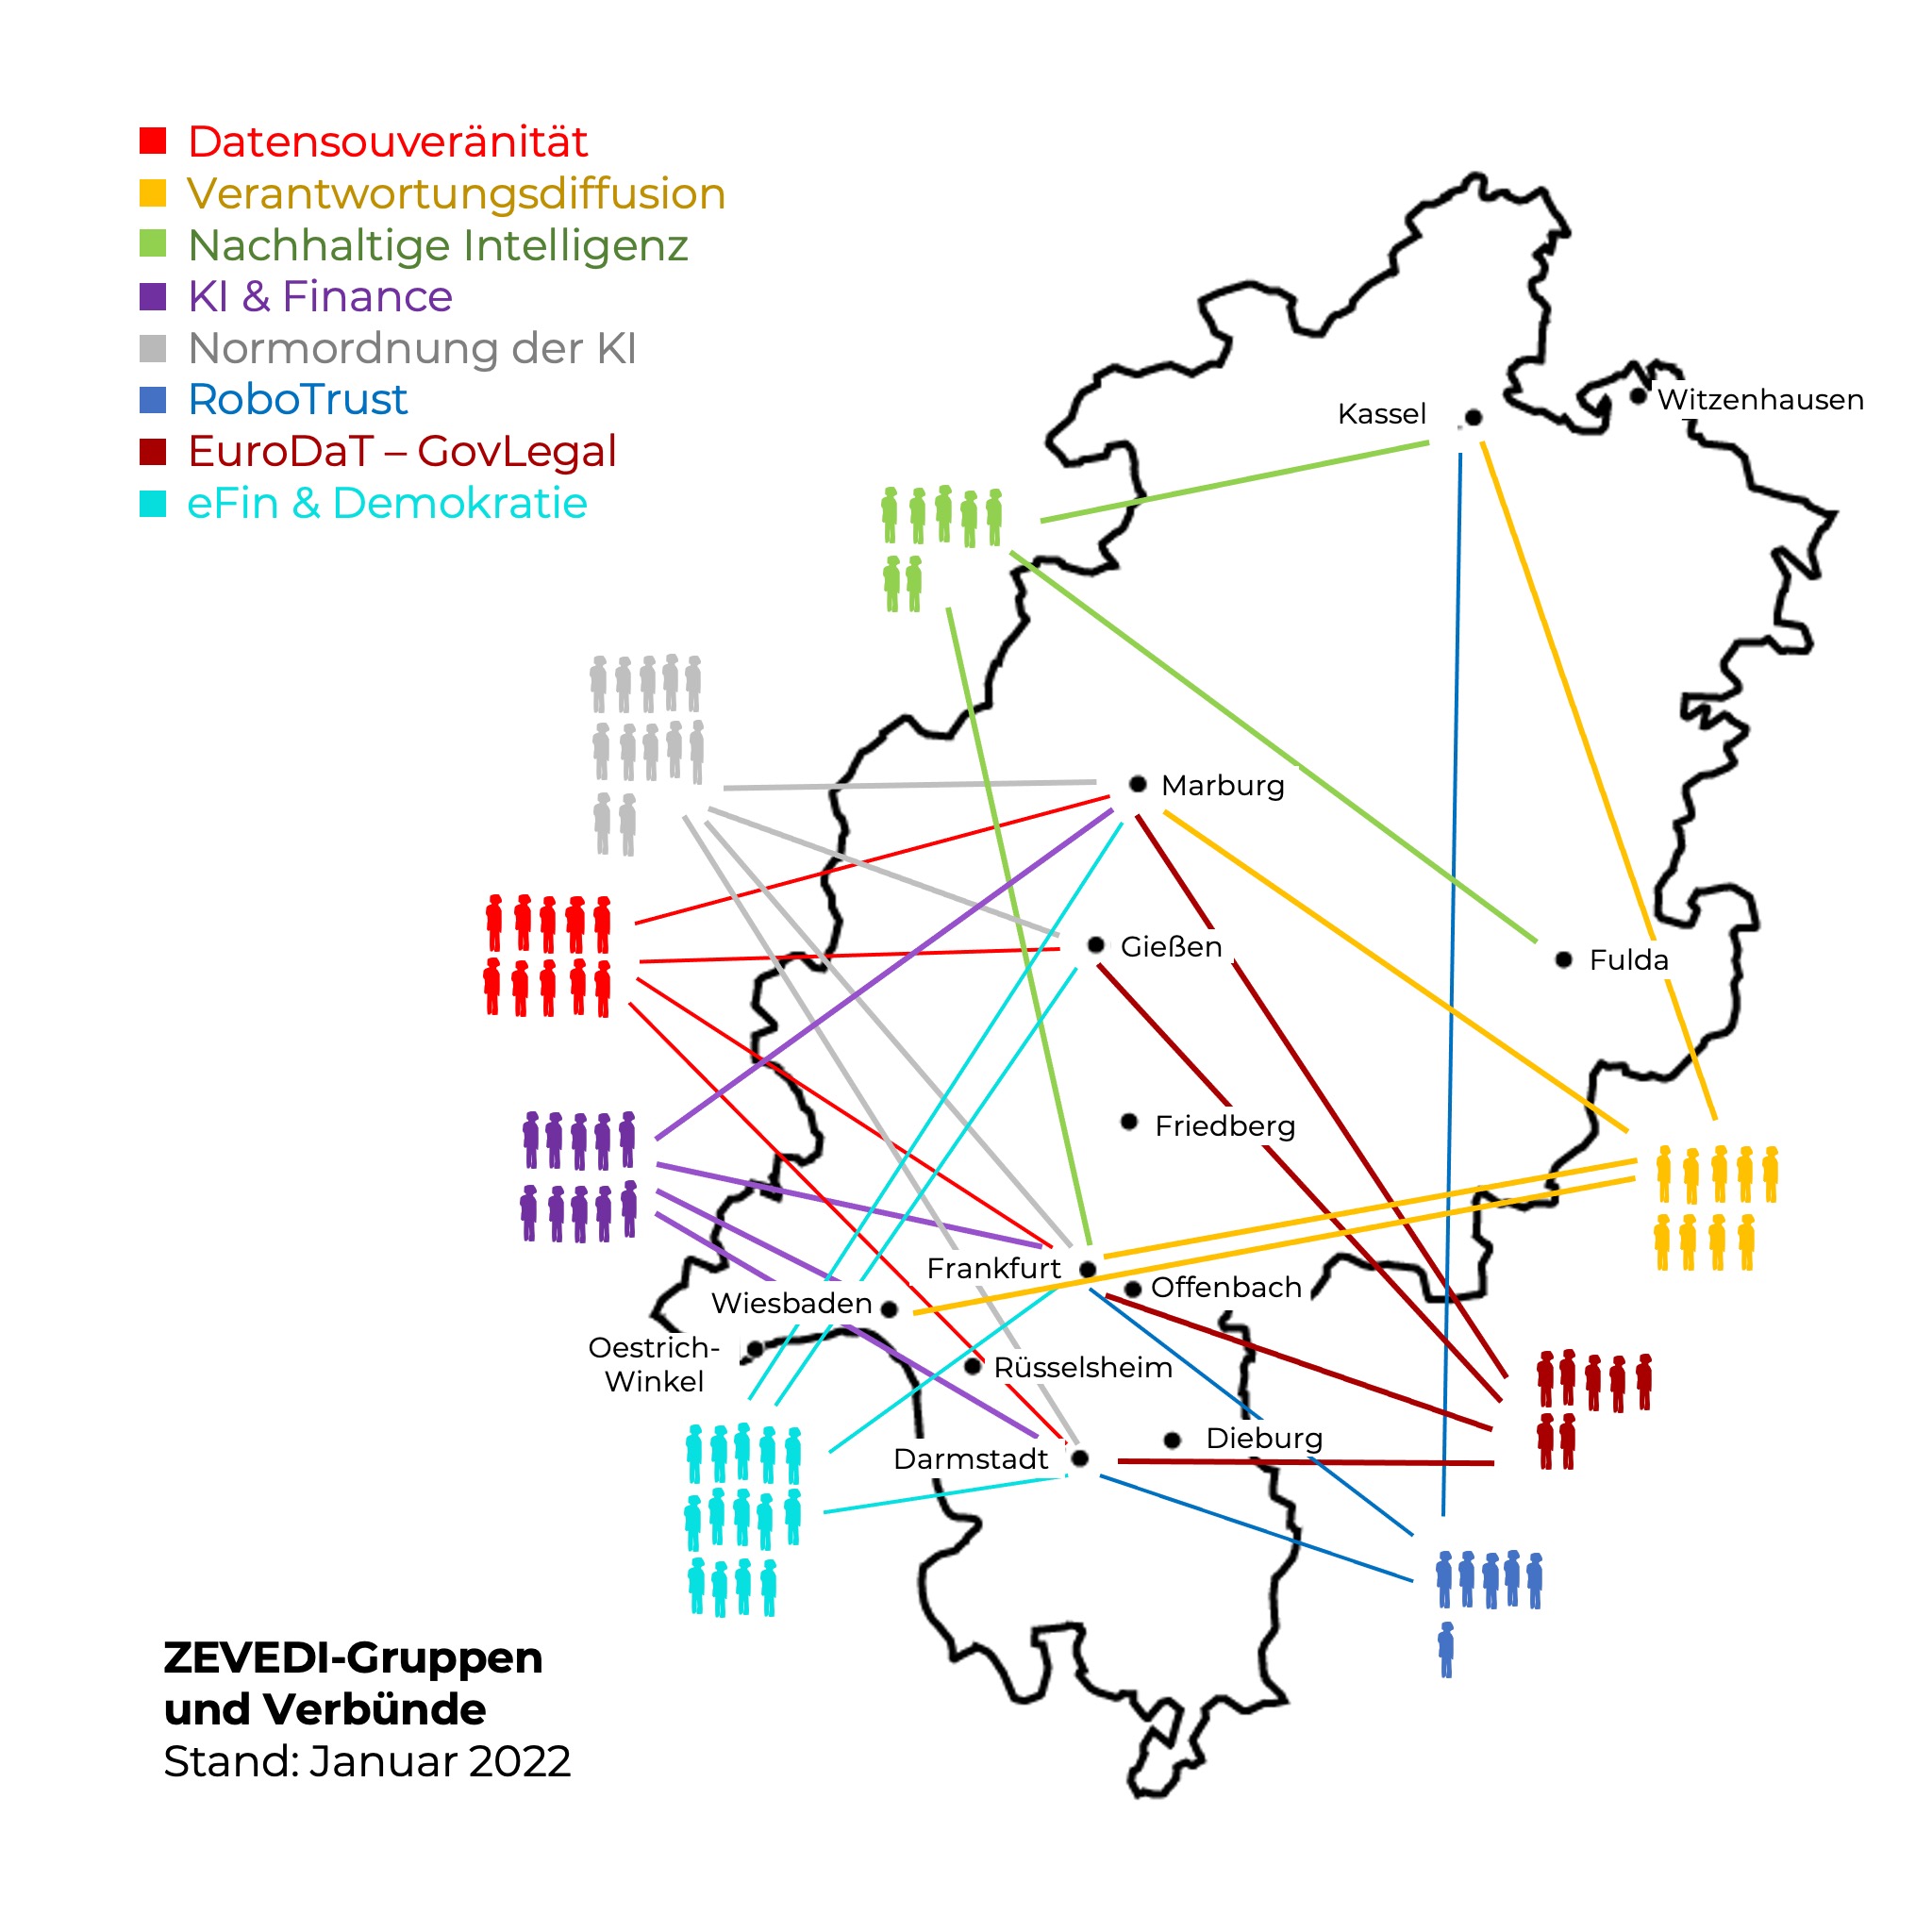 As of January 2022, about 50 active Principle Investigators are involved in the Hesse-wide ZEVEDI network. The scientists are affiliated with the university locations of Kassel, Marburg, Giessen, Fulda, Frankfurt, Wiesbaden and Darmstadt. Some PIs participate in several groups and alliances of the centre:

A total of 10 PIs from Marburg, Giessen, Frankfurt and Darmstadt are participating in the topic 